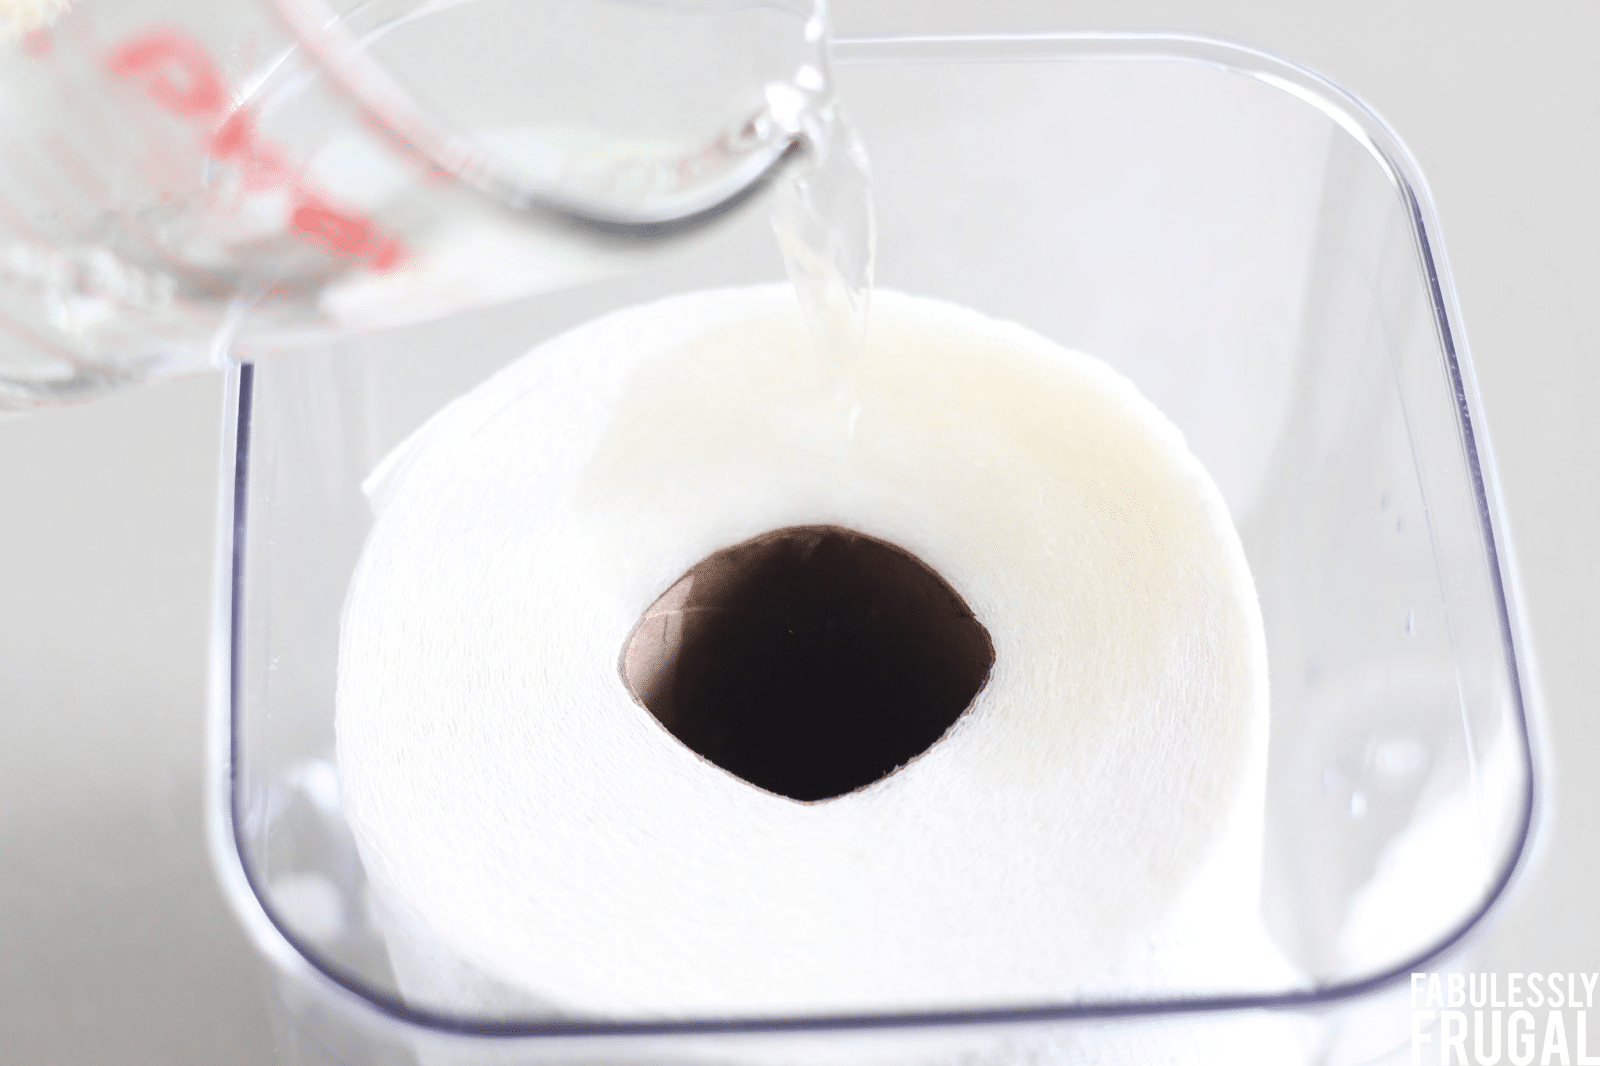 Pouring the DIY cleaning solution over paper towels